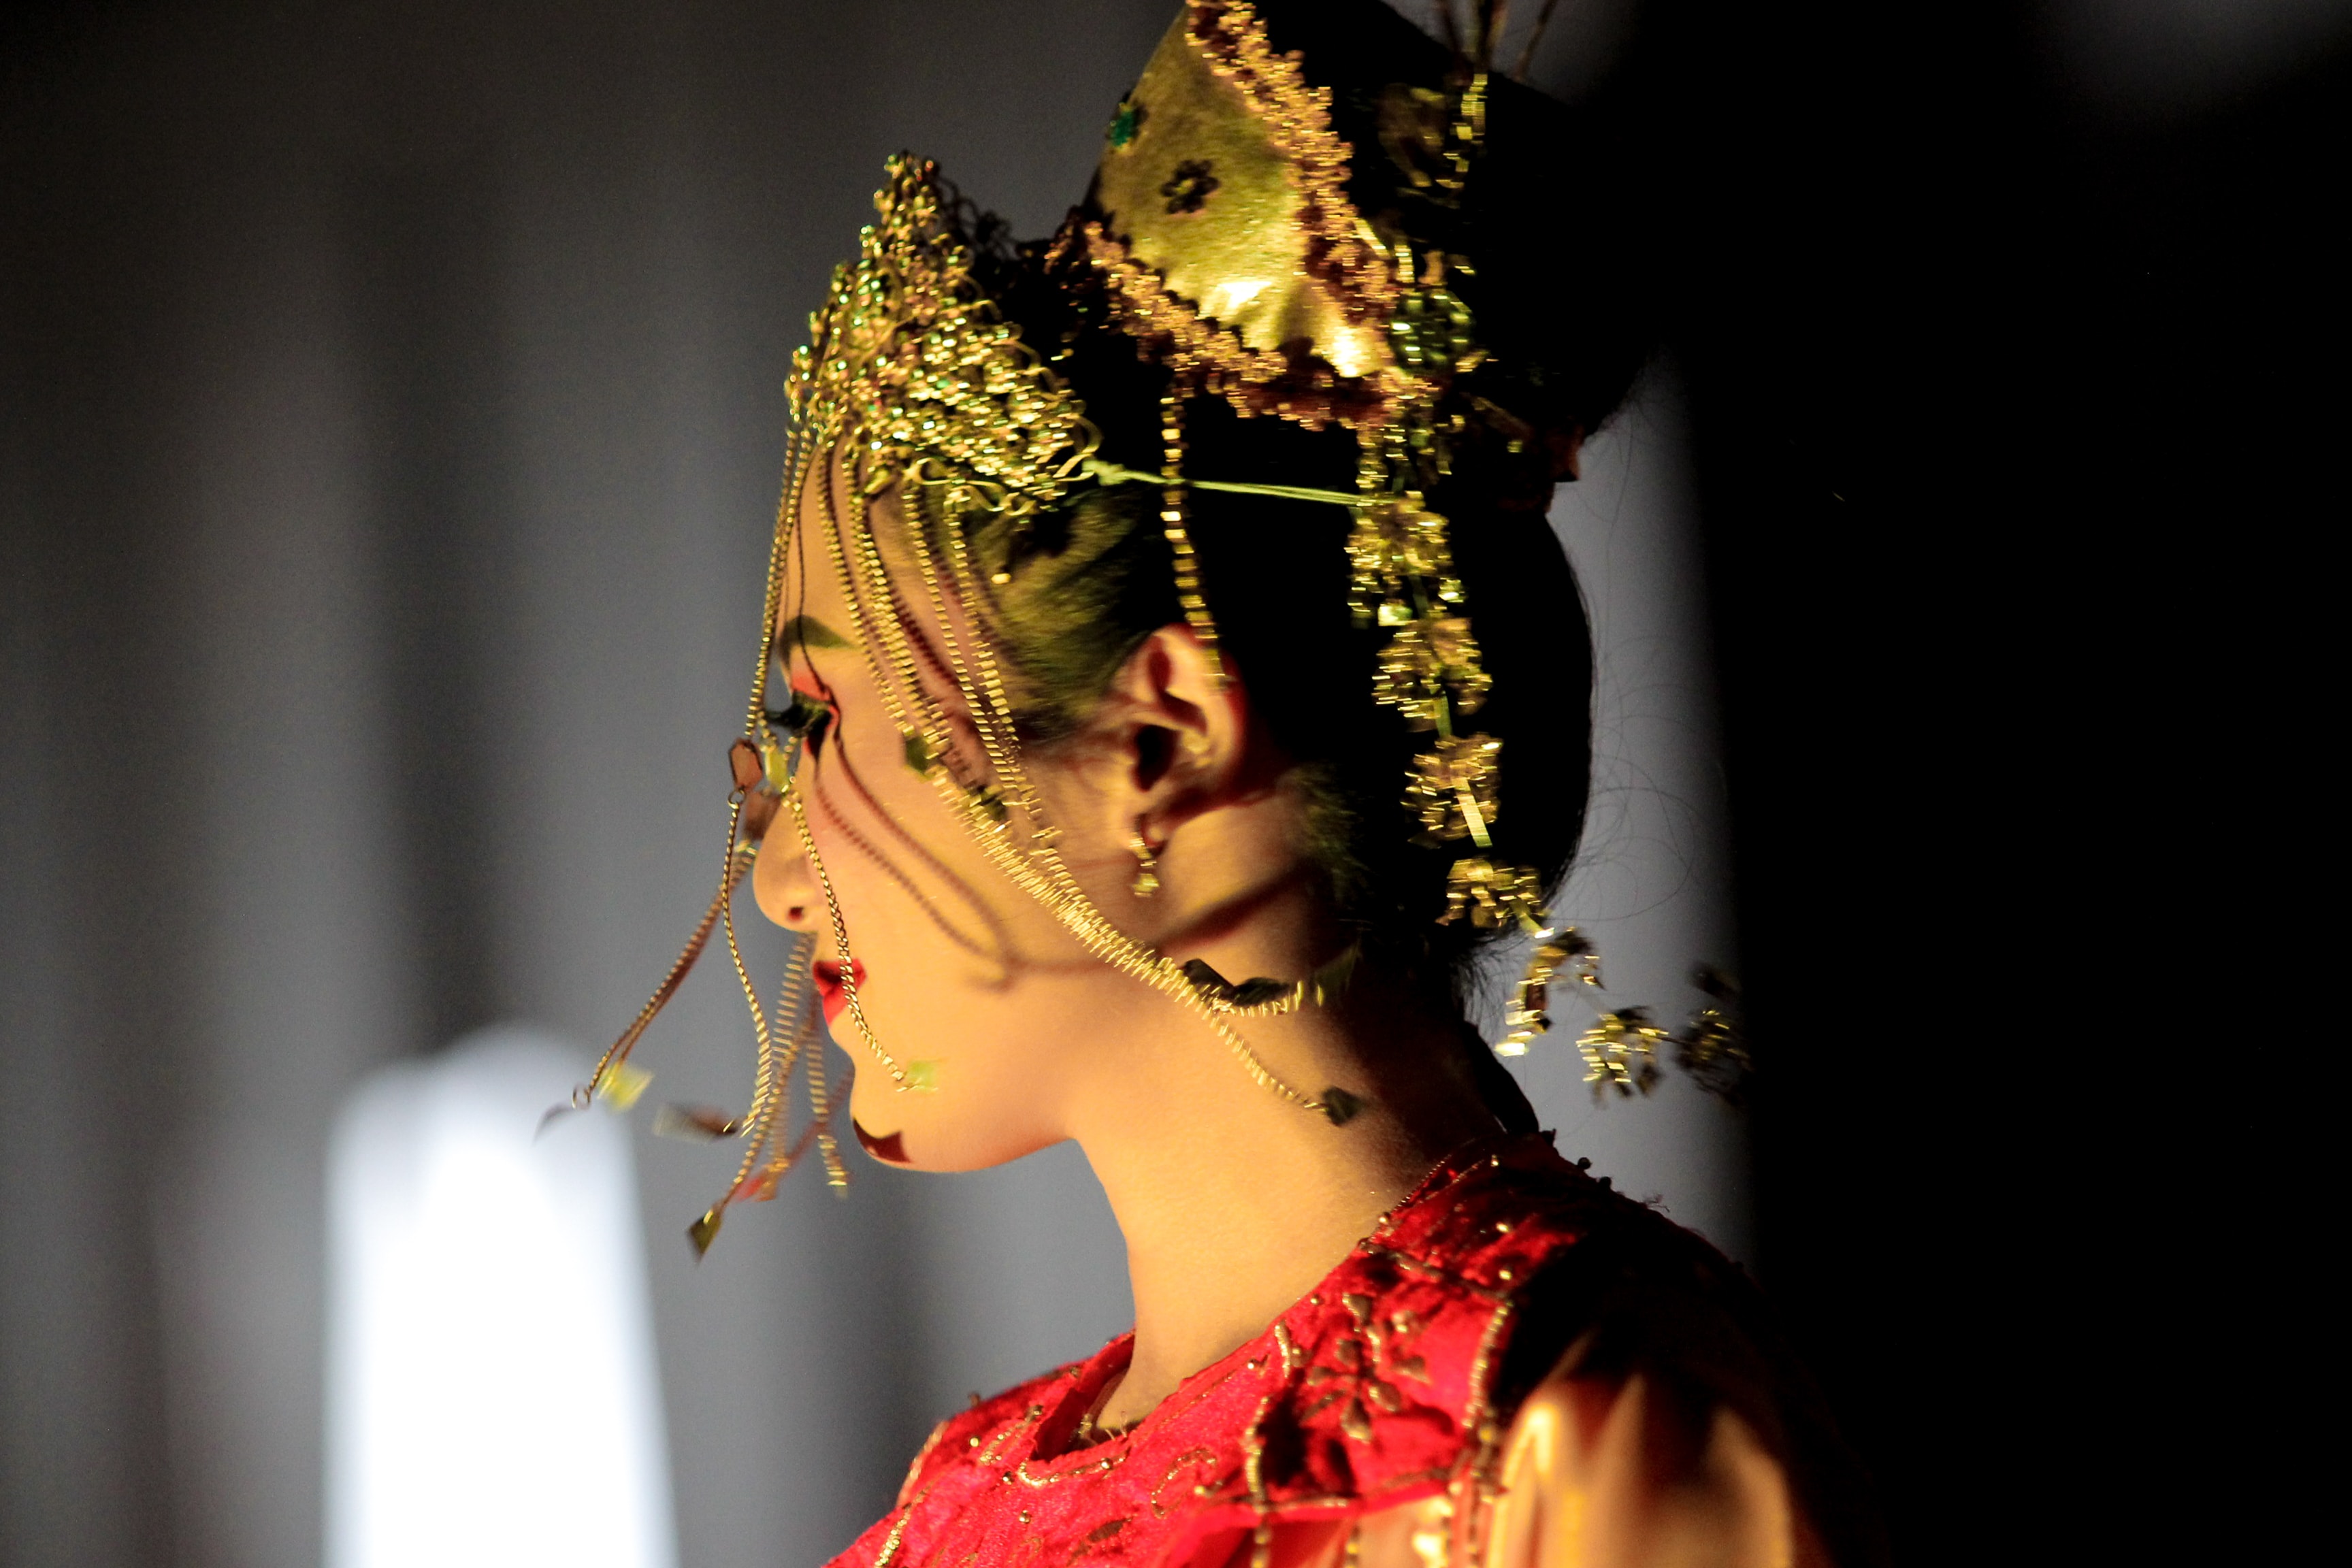 Stage photography of Indonesian culture and performance arts